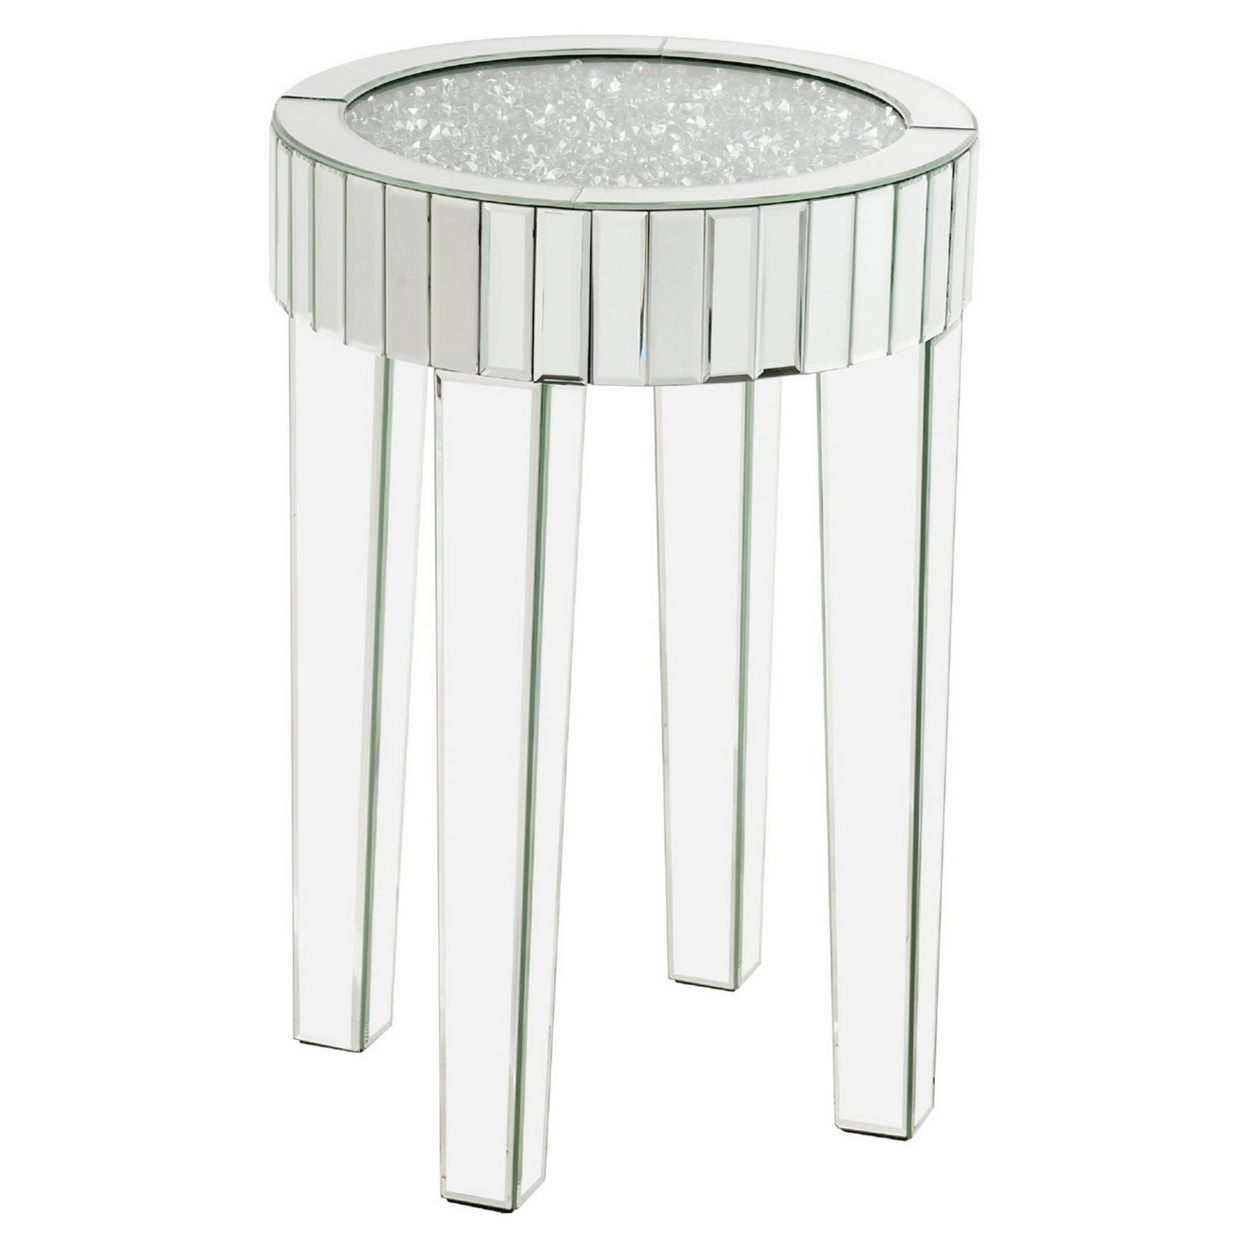 End Table With Mirror Trim And Faux Diamond Inlays, Silver- Saltoro Sherpi